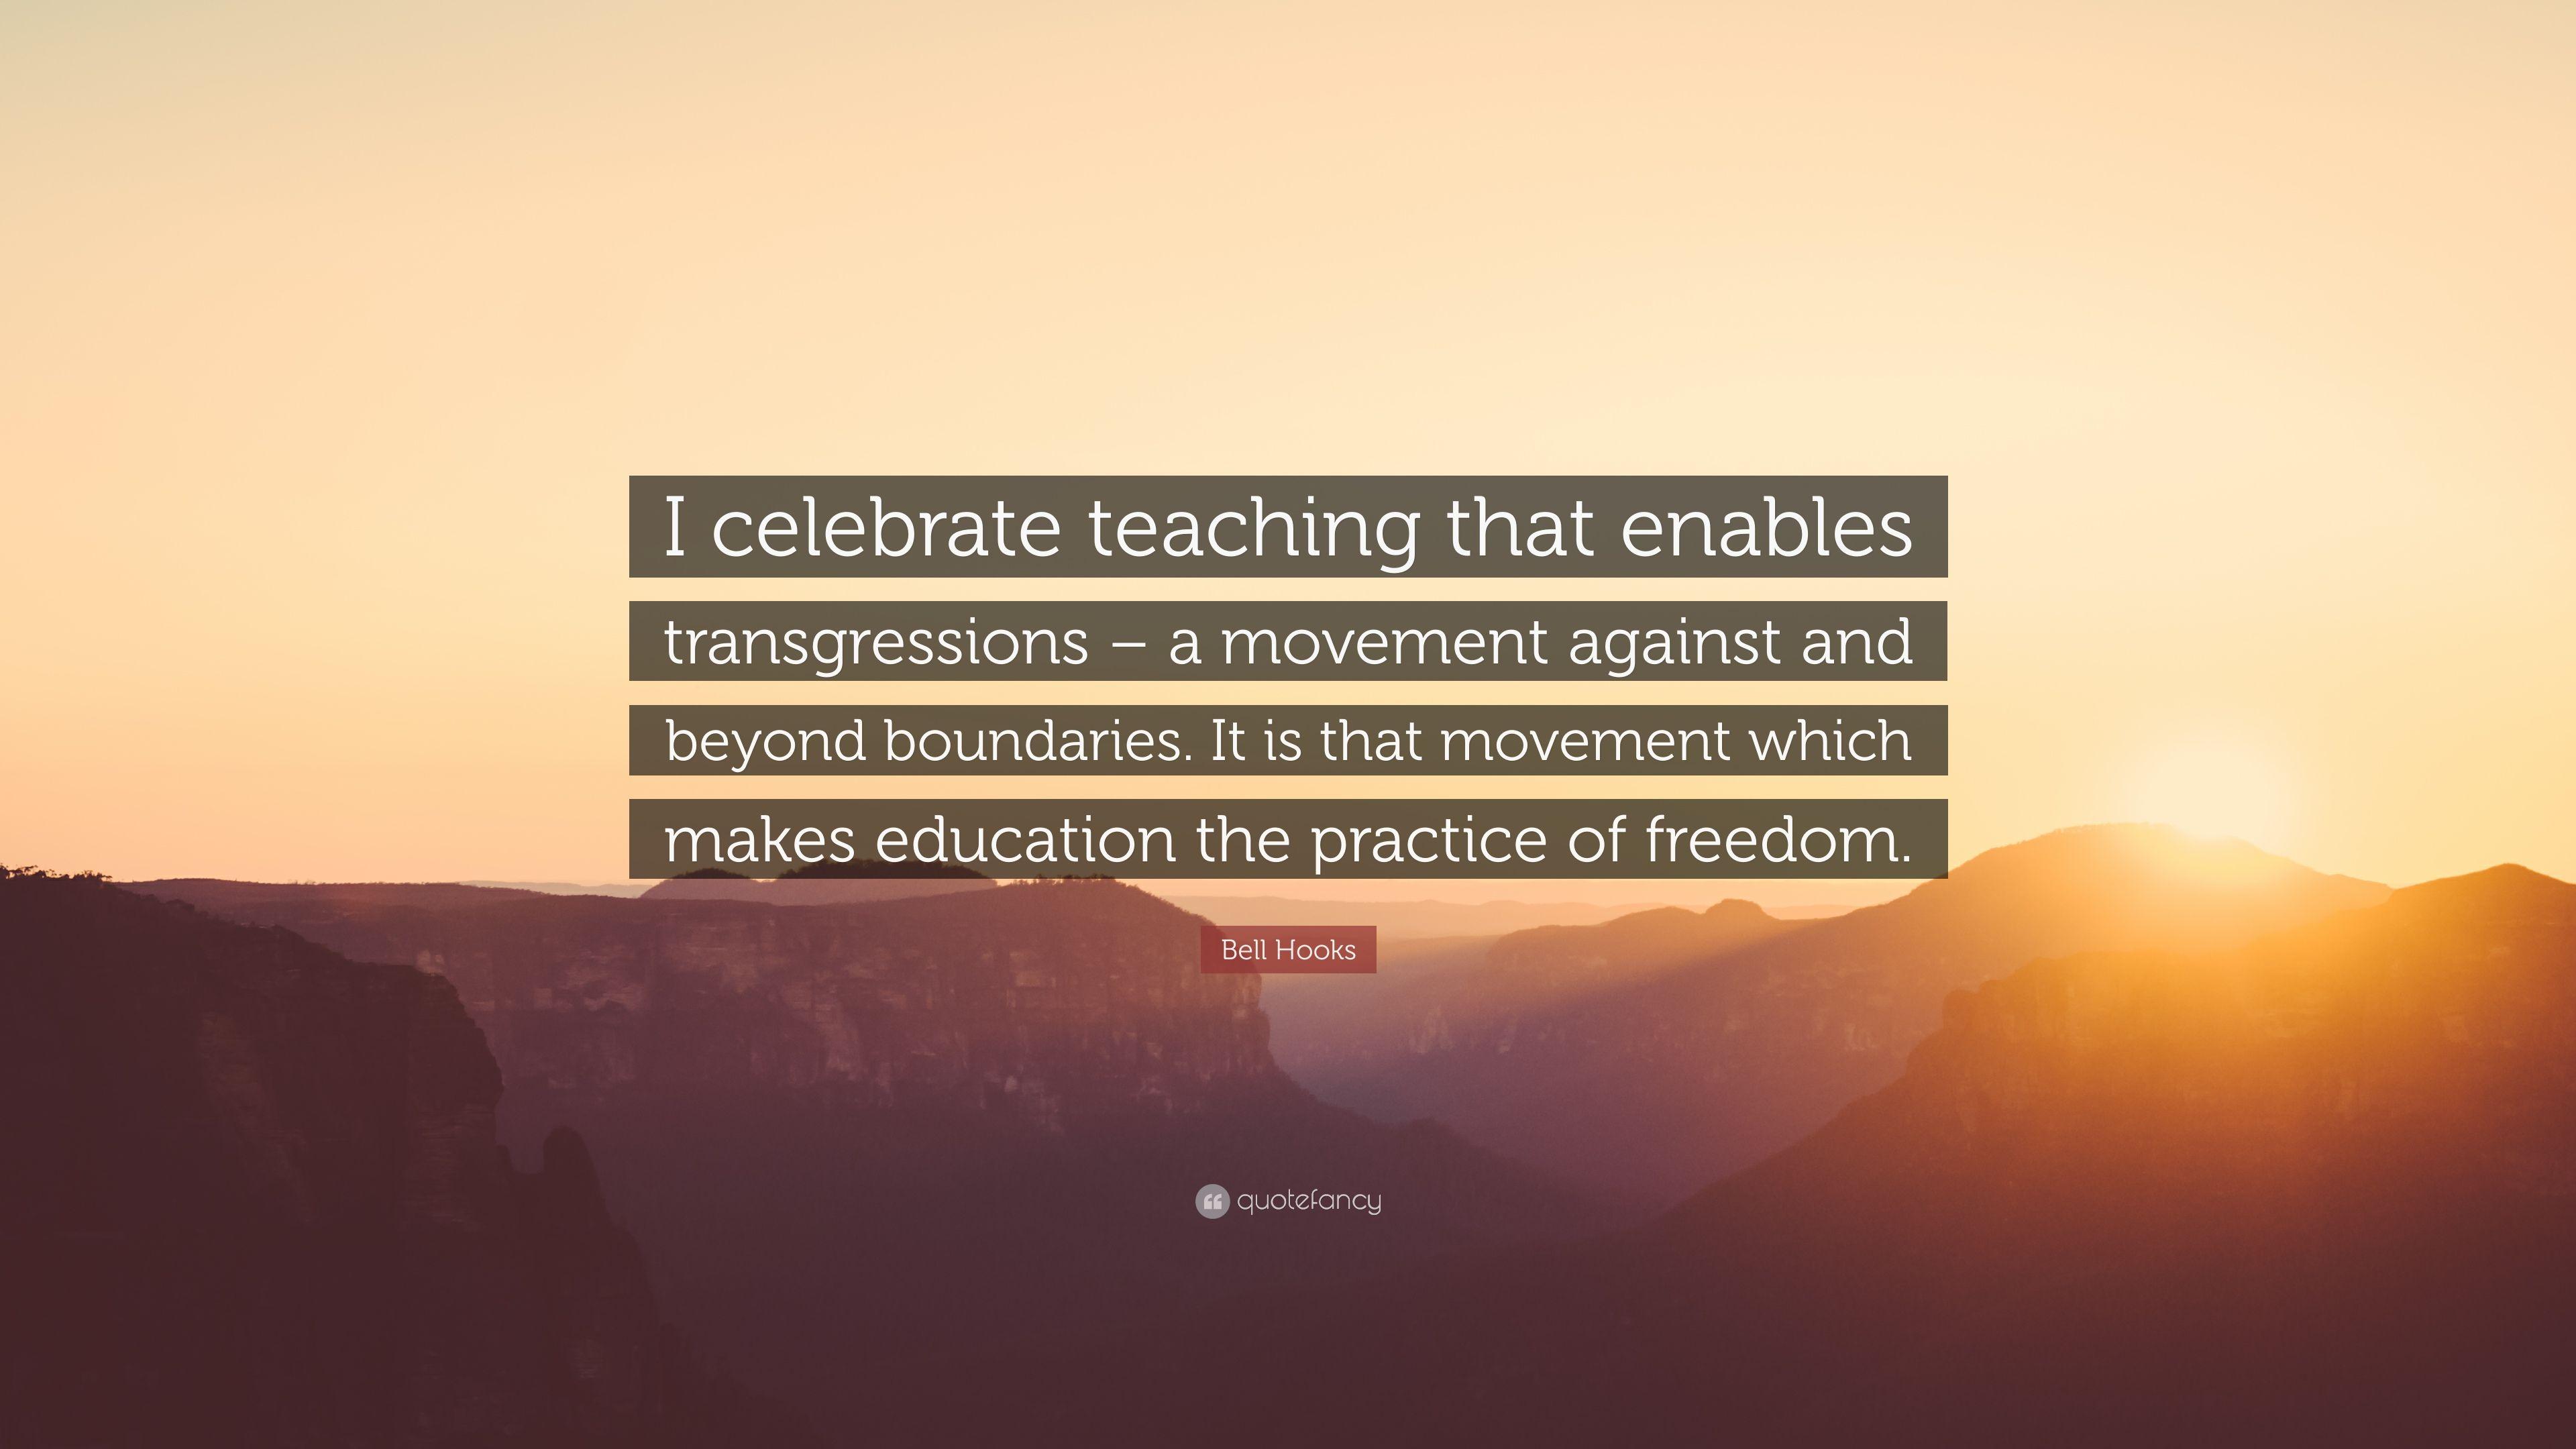 Bell Hooks Quote: “I celebrate teaching that enables